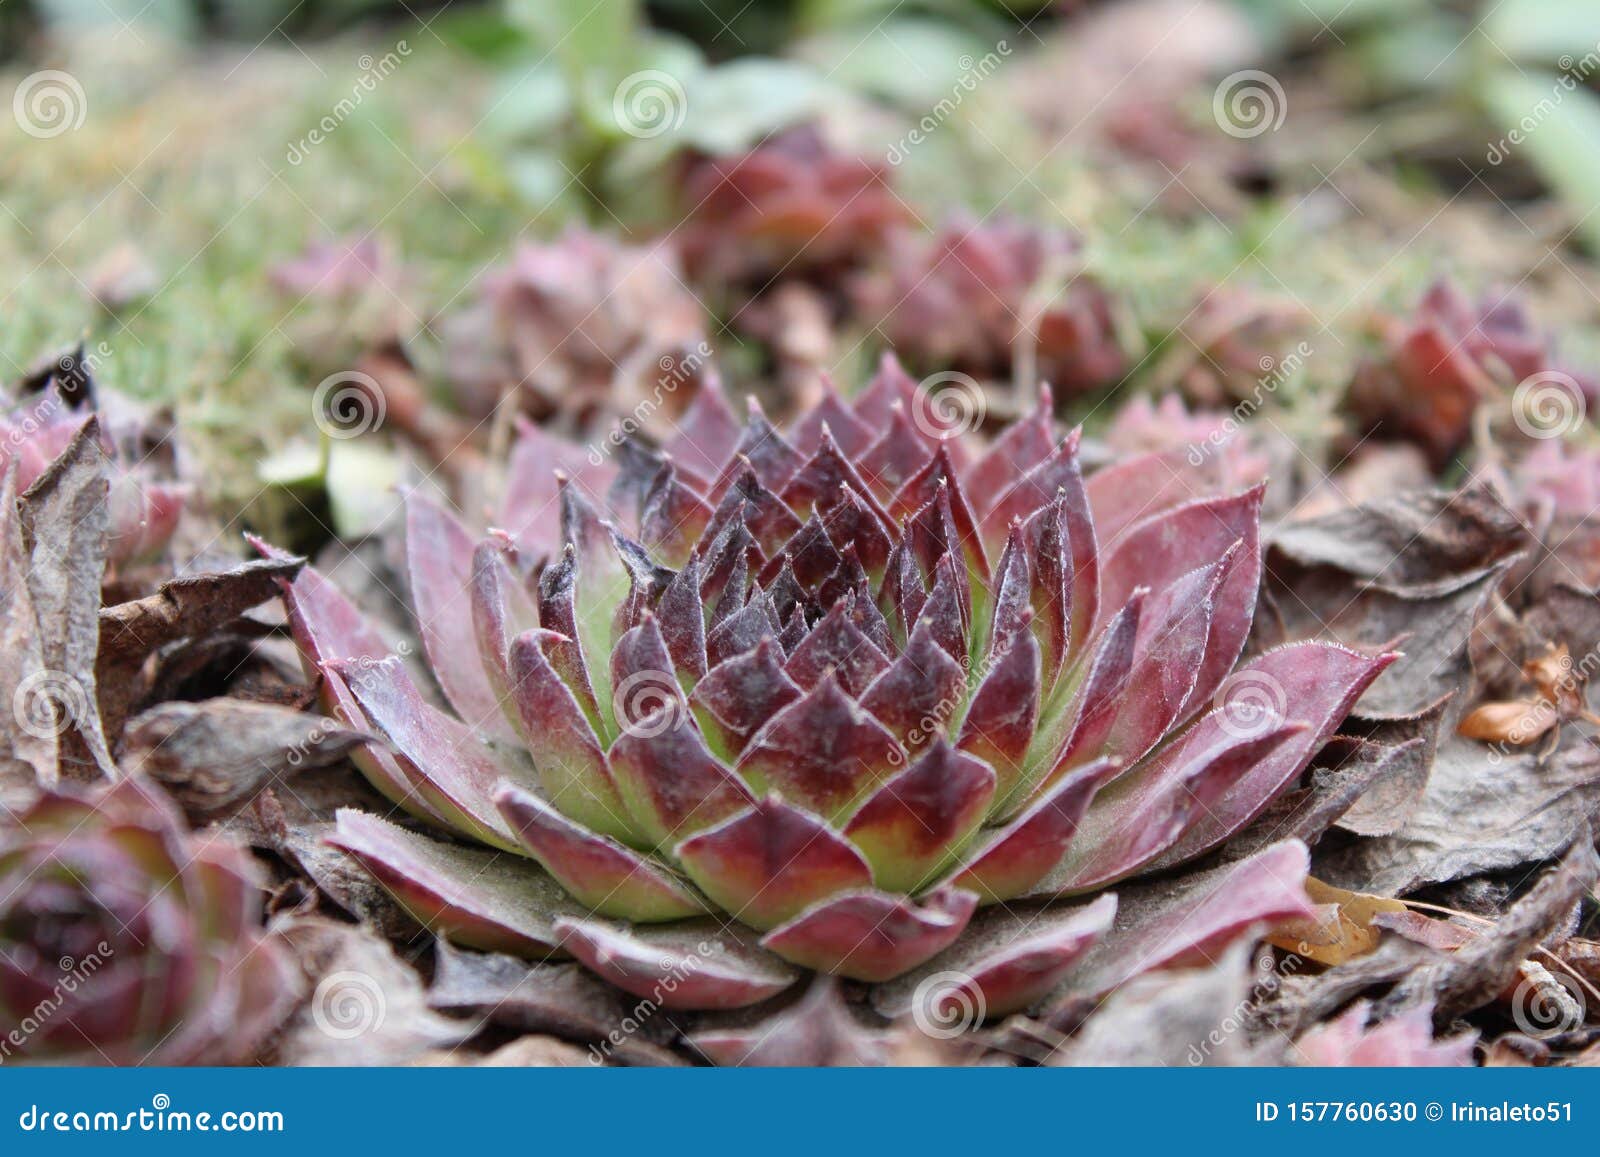 Youngly Stone Rose and Sedum are Succulent Plants of the Family ...